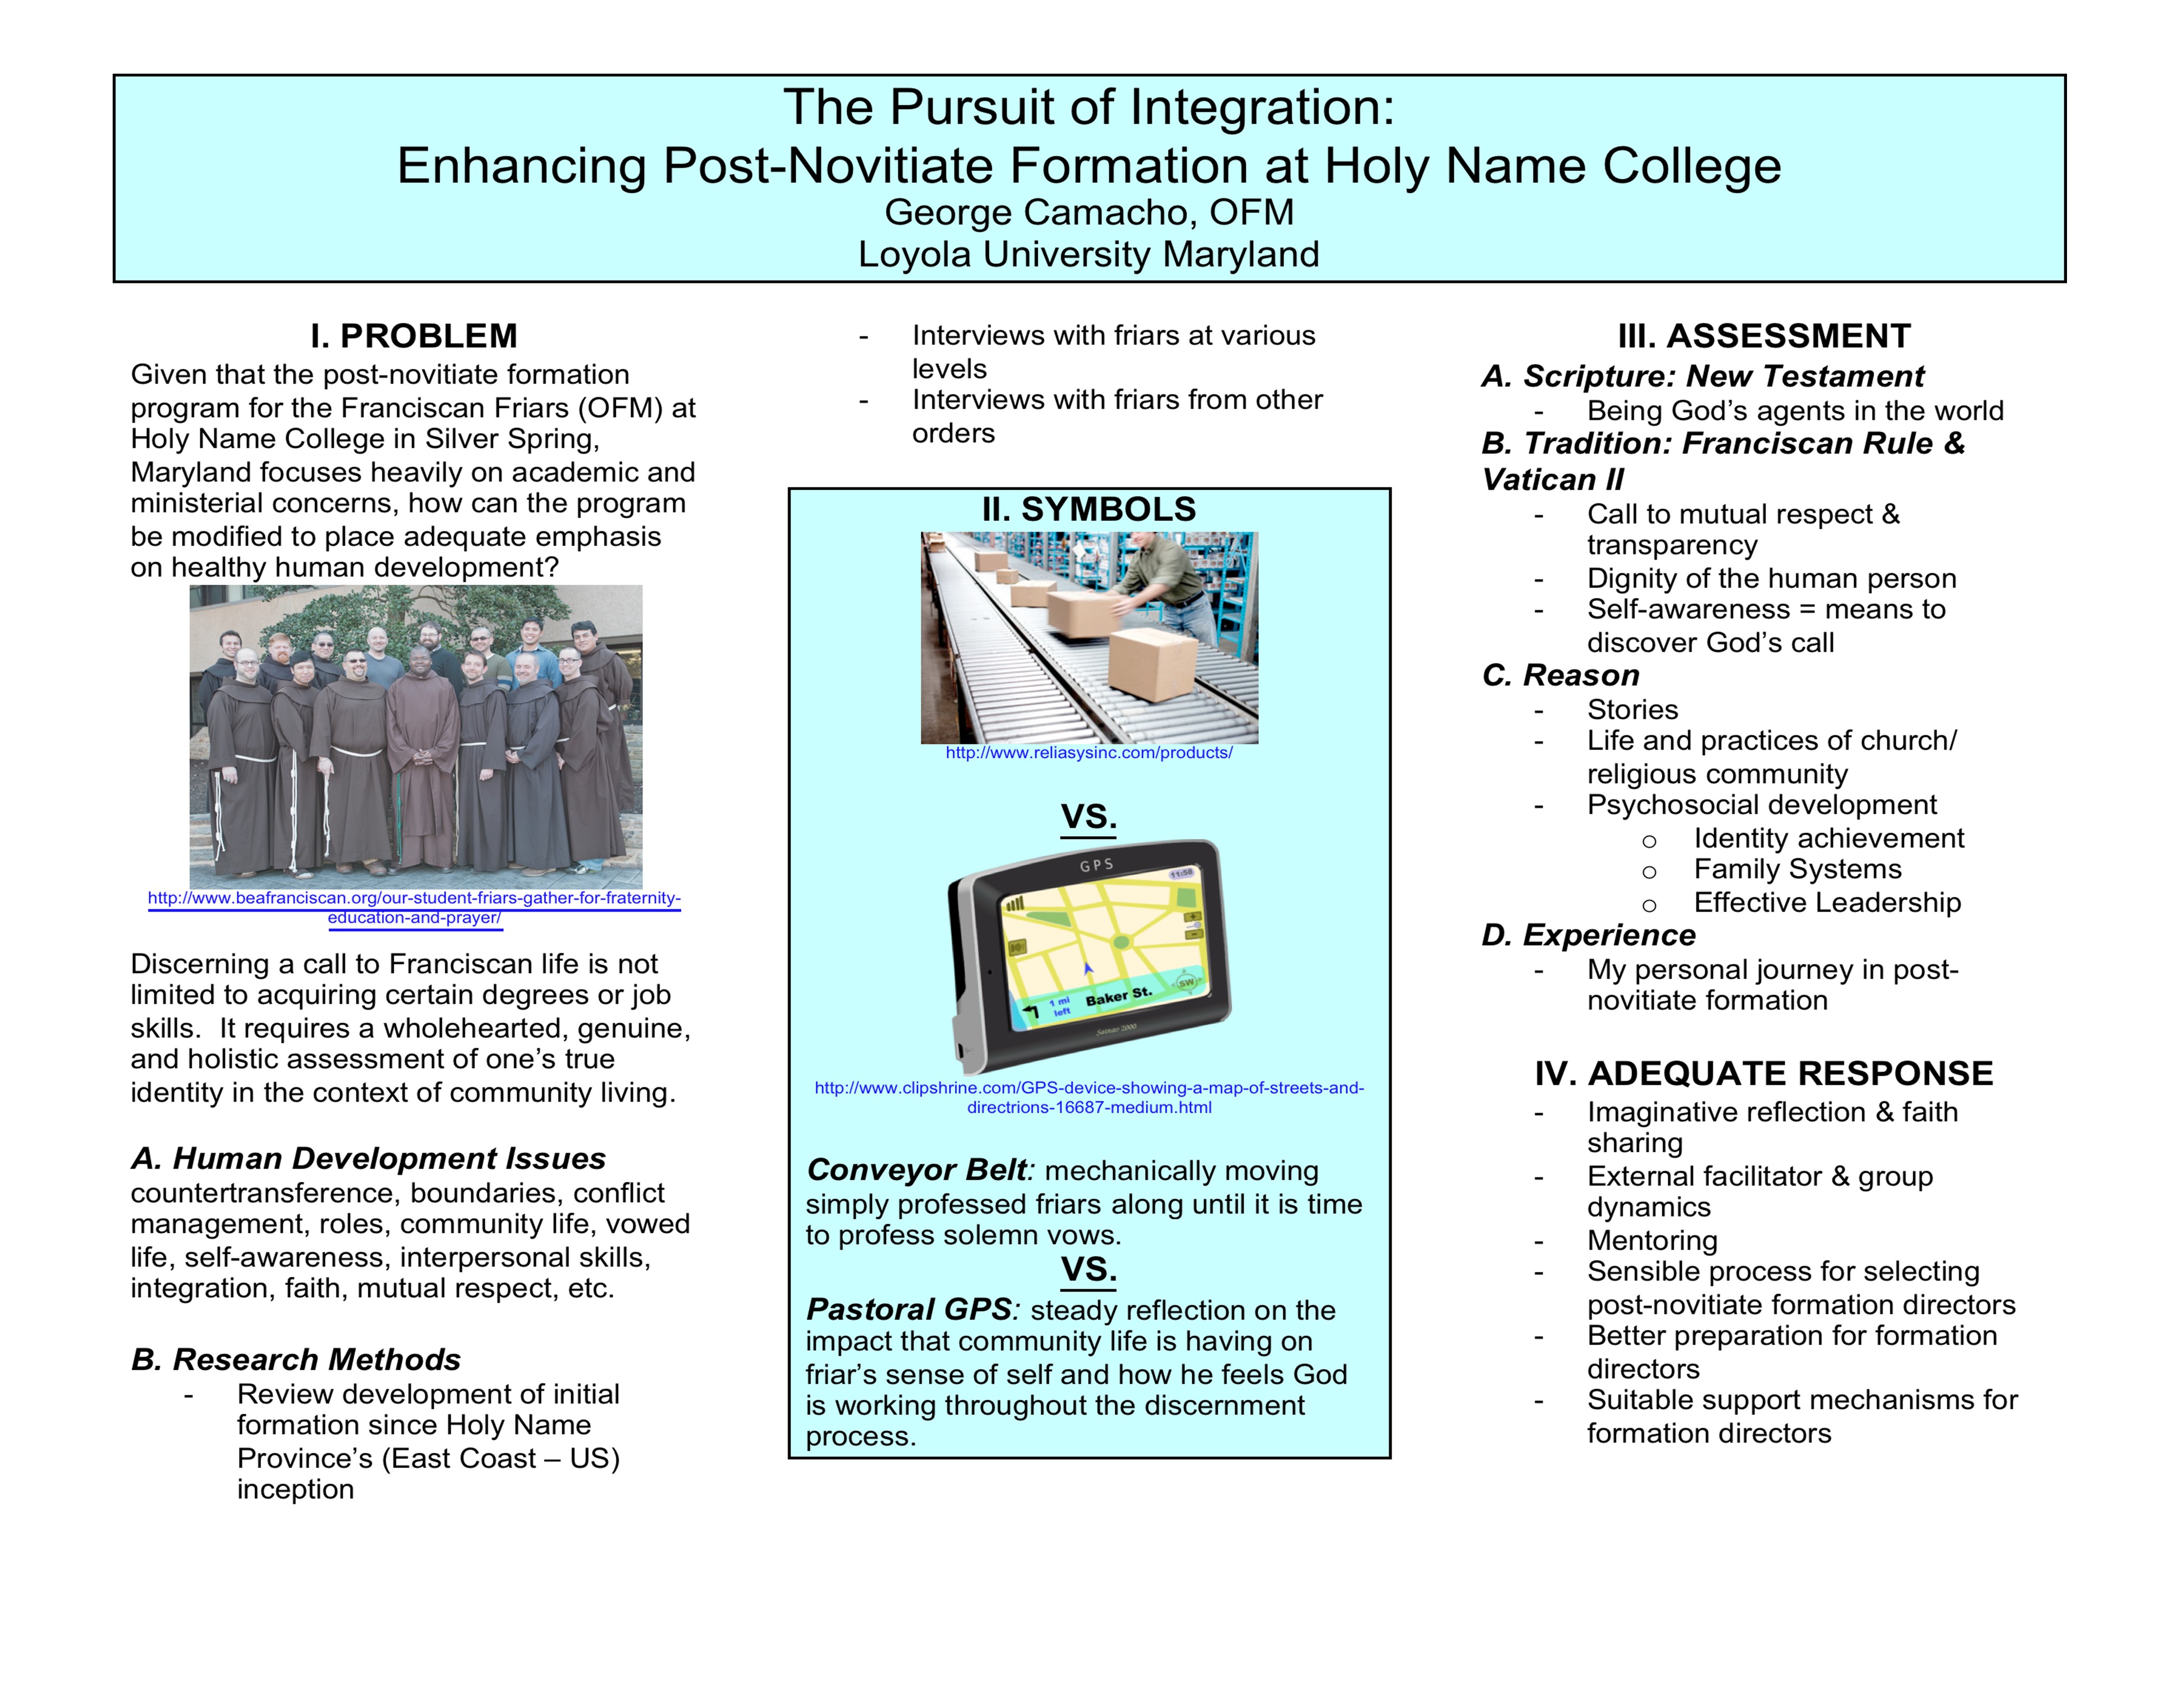 poster image: The Pursuit of Integration: Enhancing Post-Novitiate Formation at Holy Name College